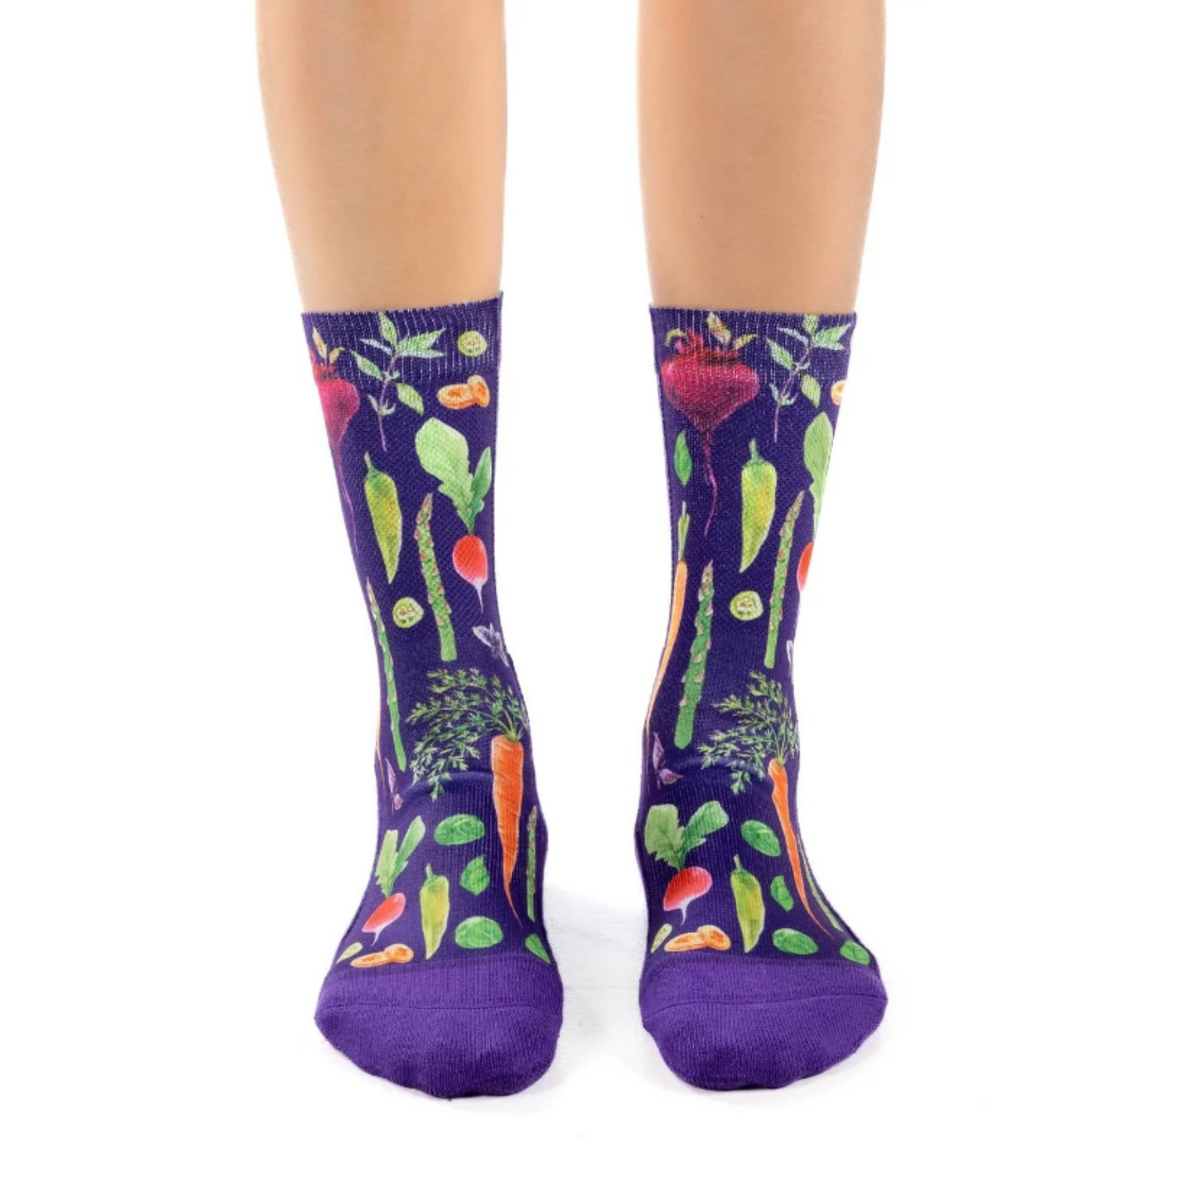 Good Luck Sock Veggies women&#39;s sock featuring purple crew sock with beets, asparagus, carrots, radishes and more on model&#39;s feet